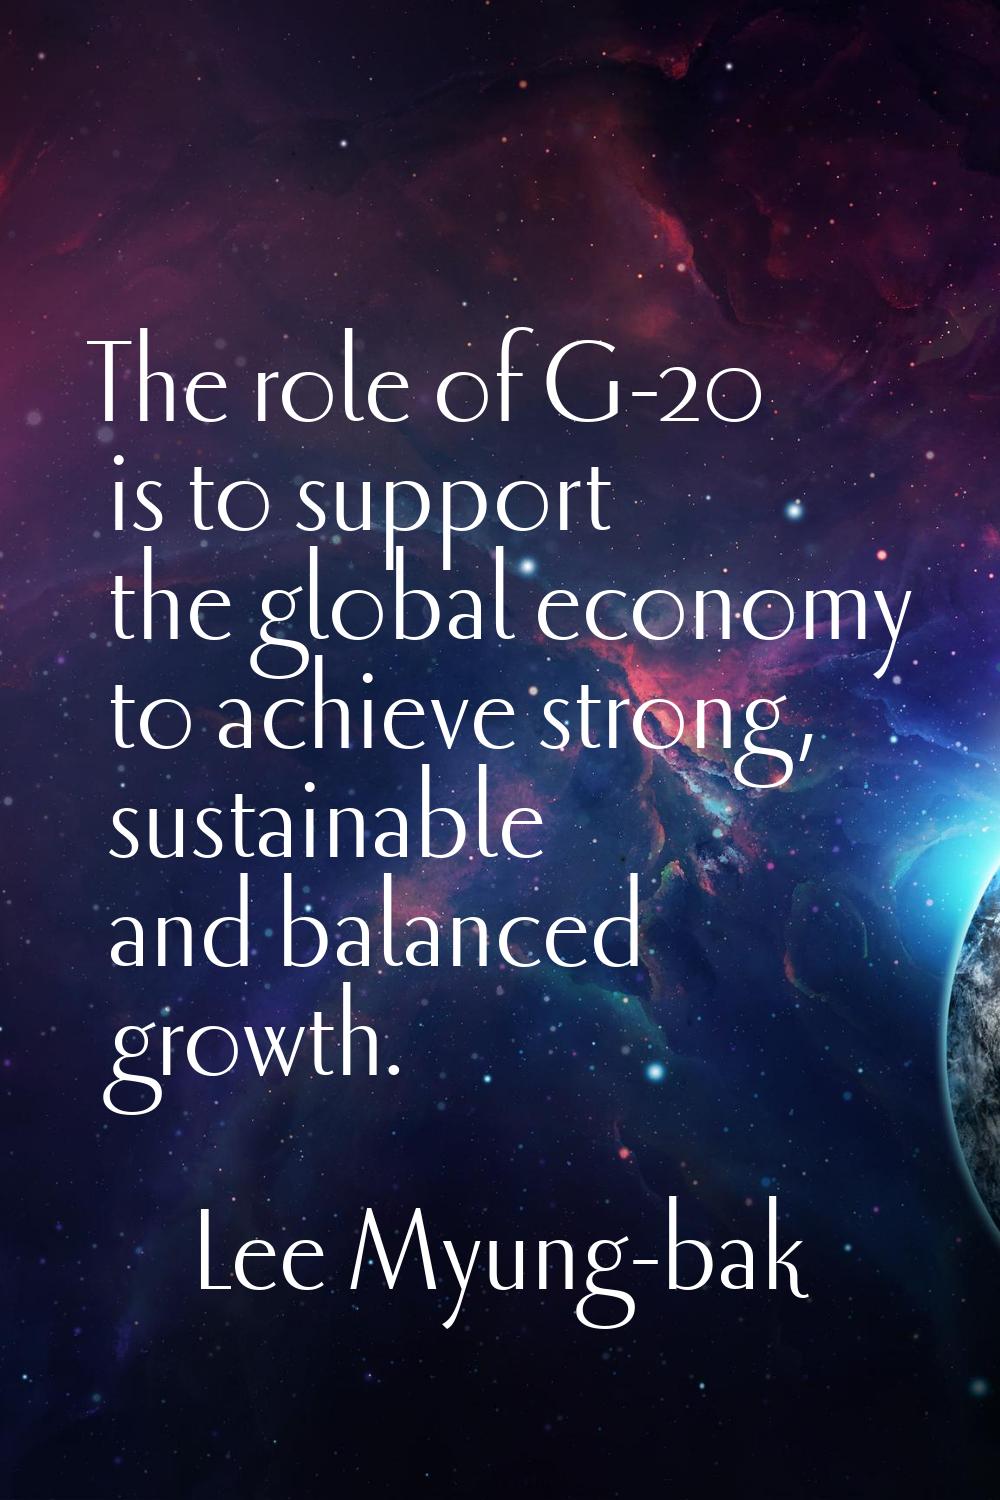 The role of G-20 is to support the global economy to achieve strong, sustainable and balanced growt